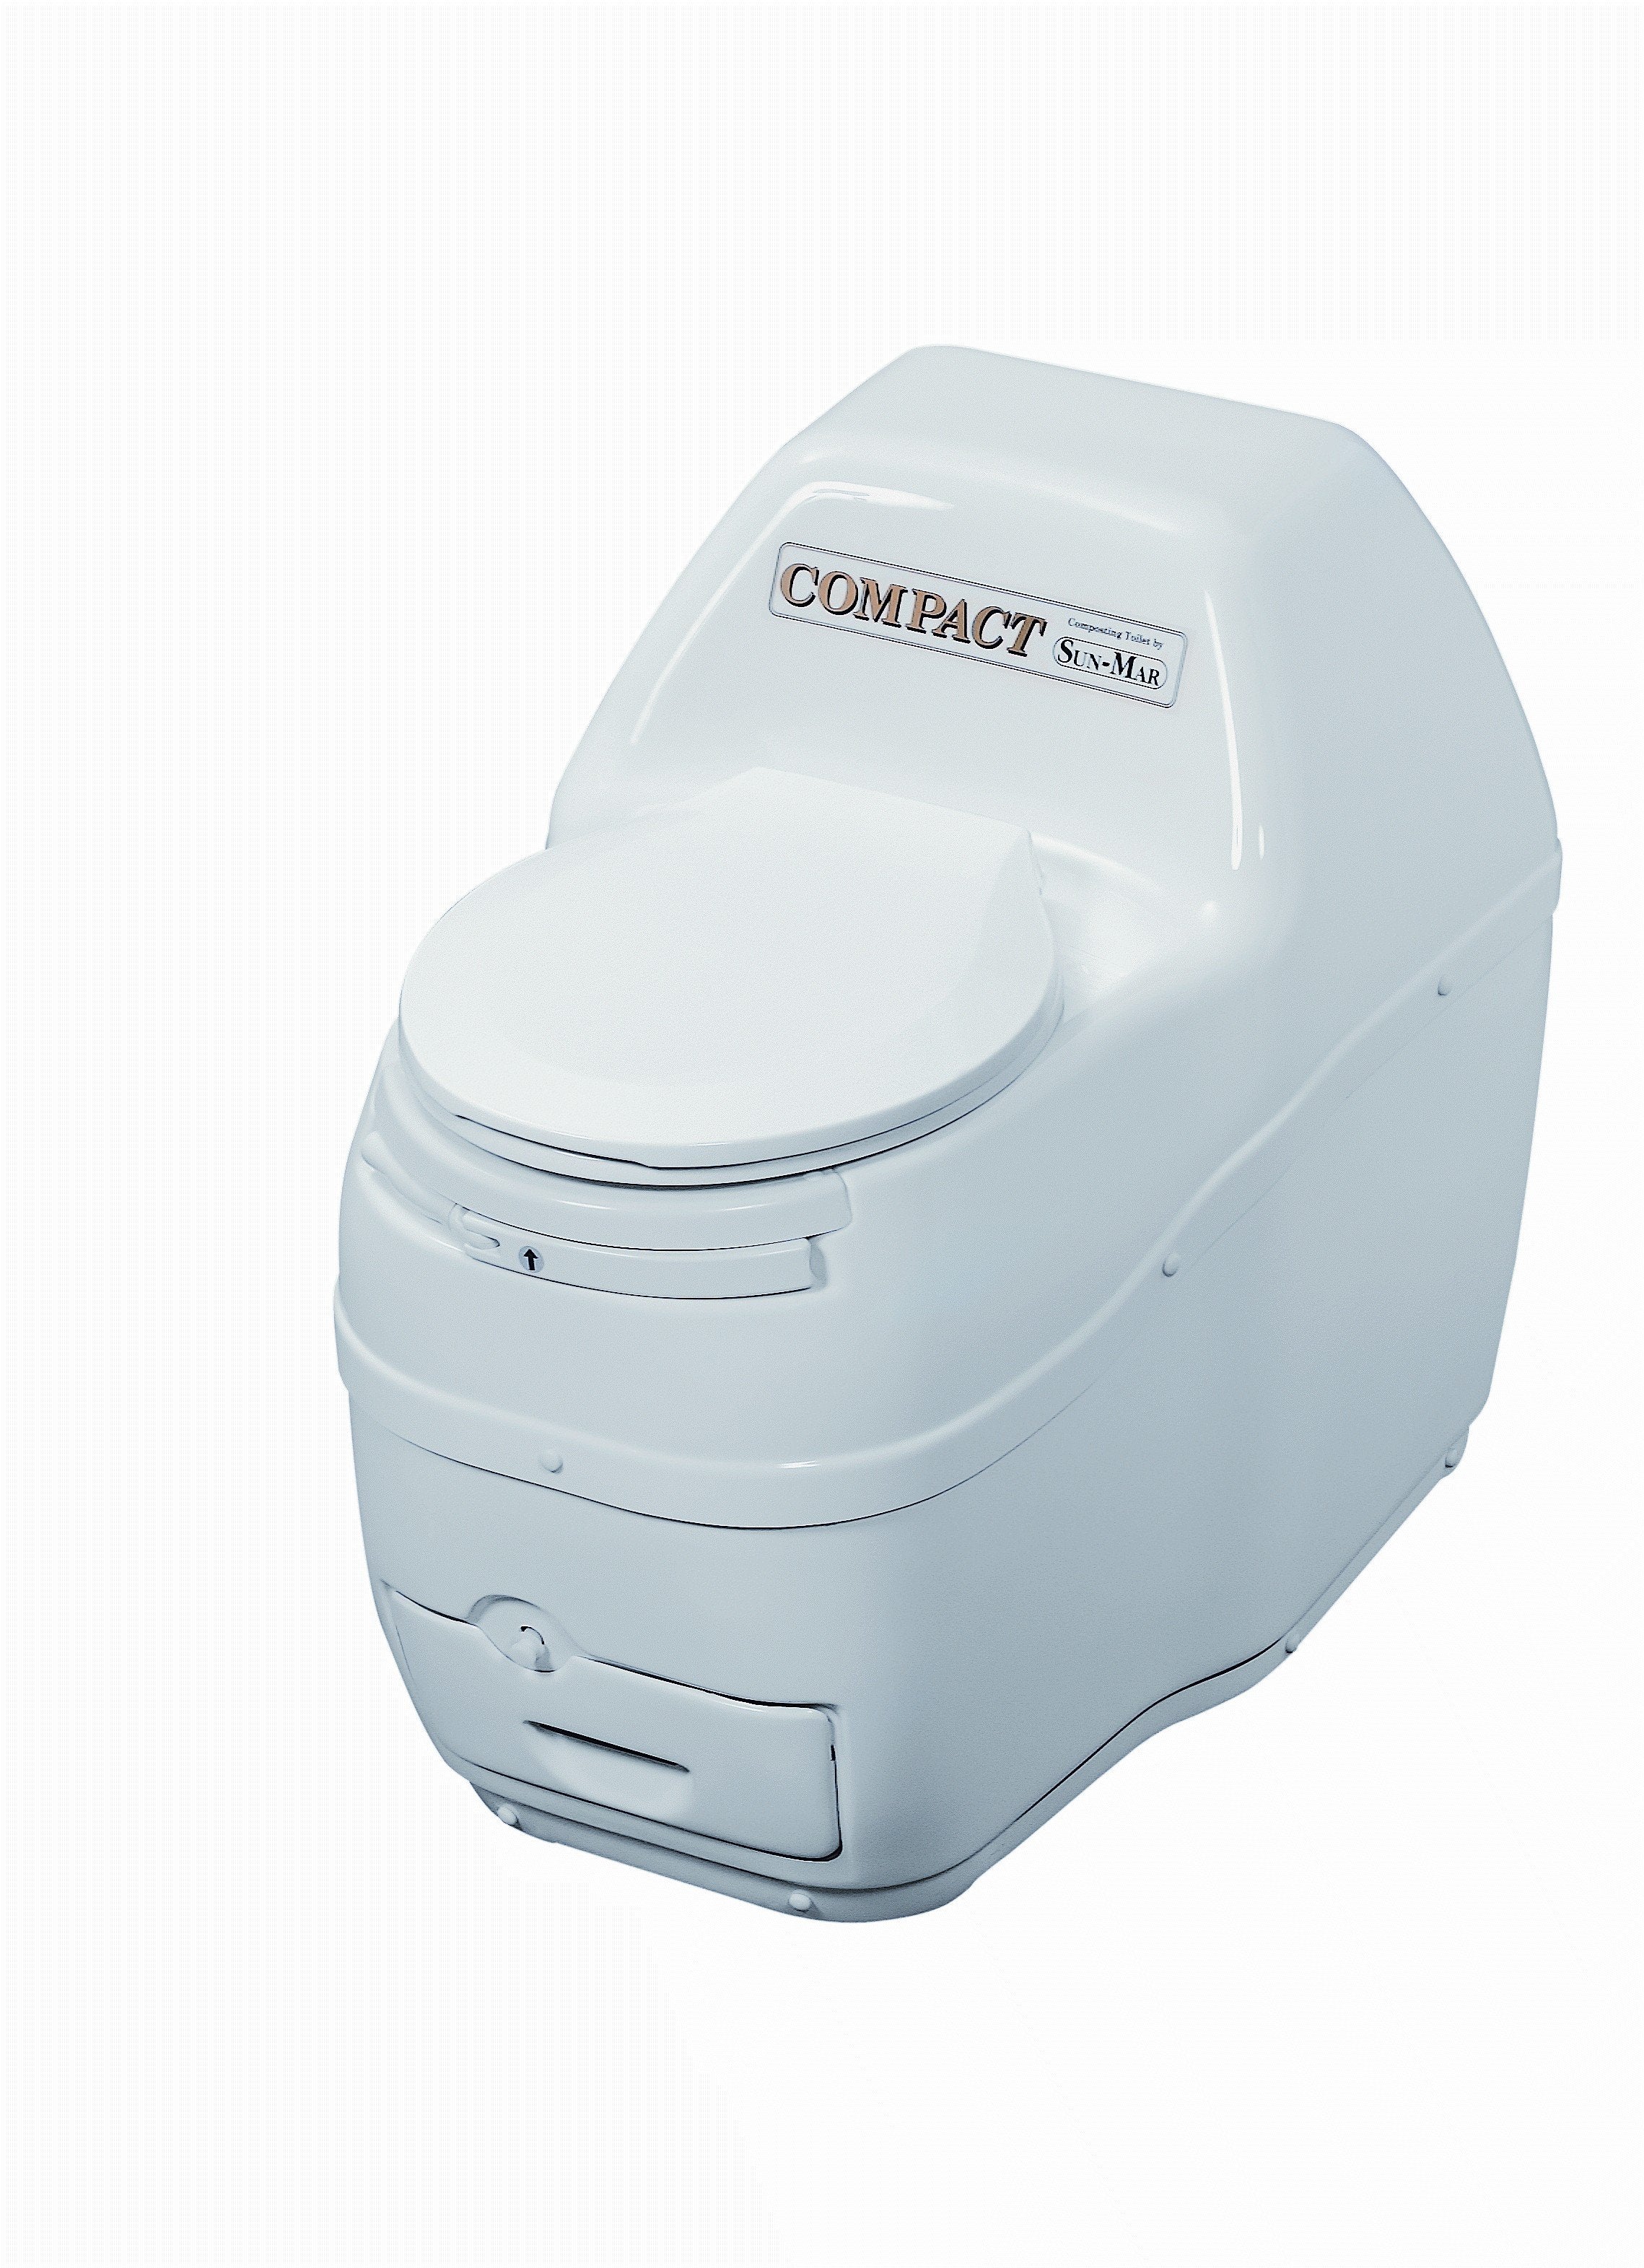 Sunmar Compact Composting Toilet